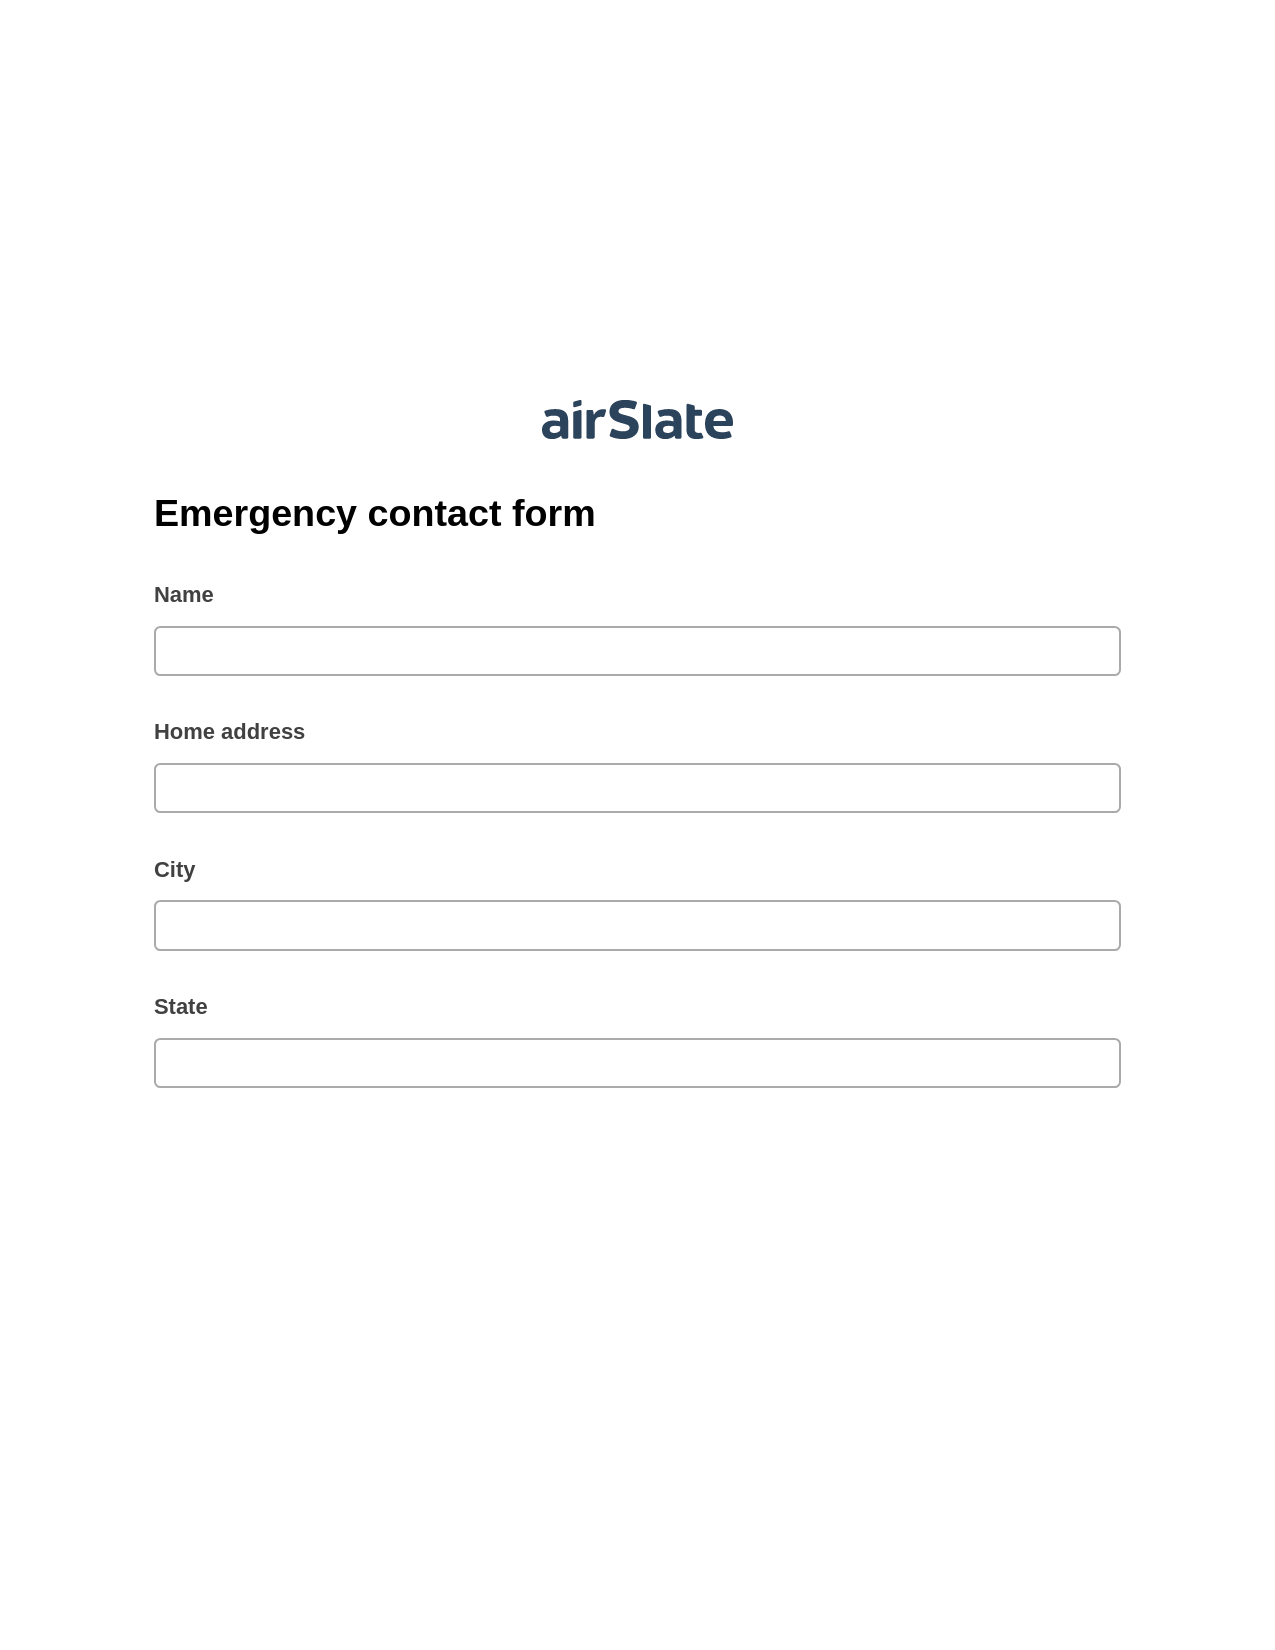 Multirole Emergency contact form Pre-fill Slate from MS Dynamics 365 Records Bot, Create NetSuite Records Bot, Export to MySQL Bot